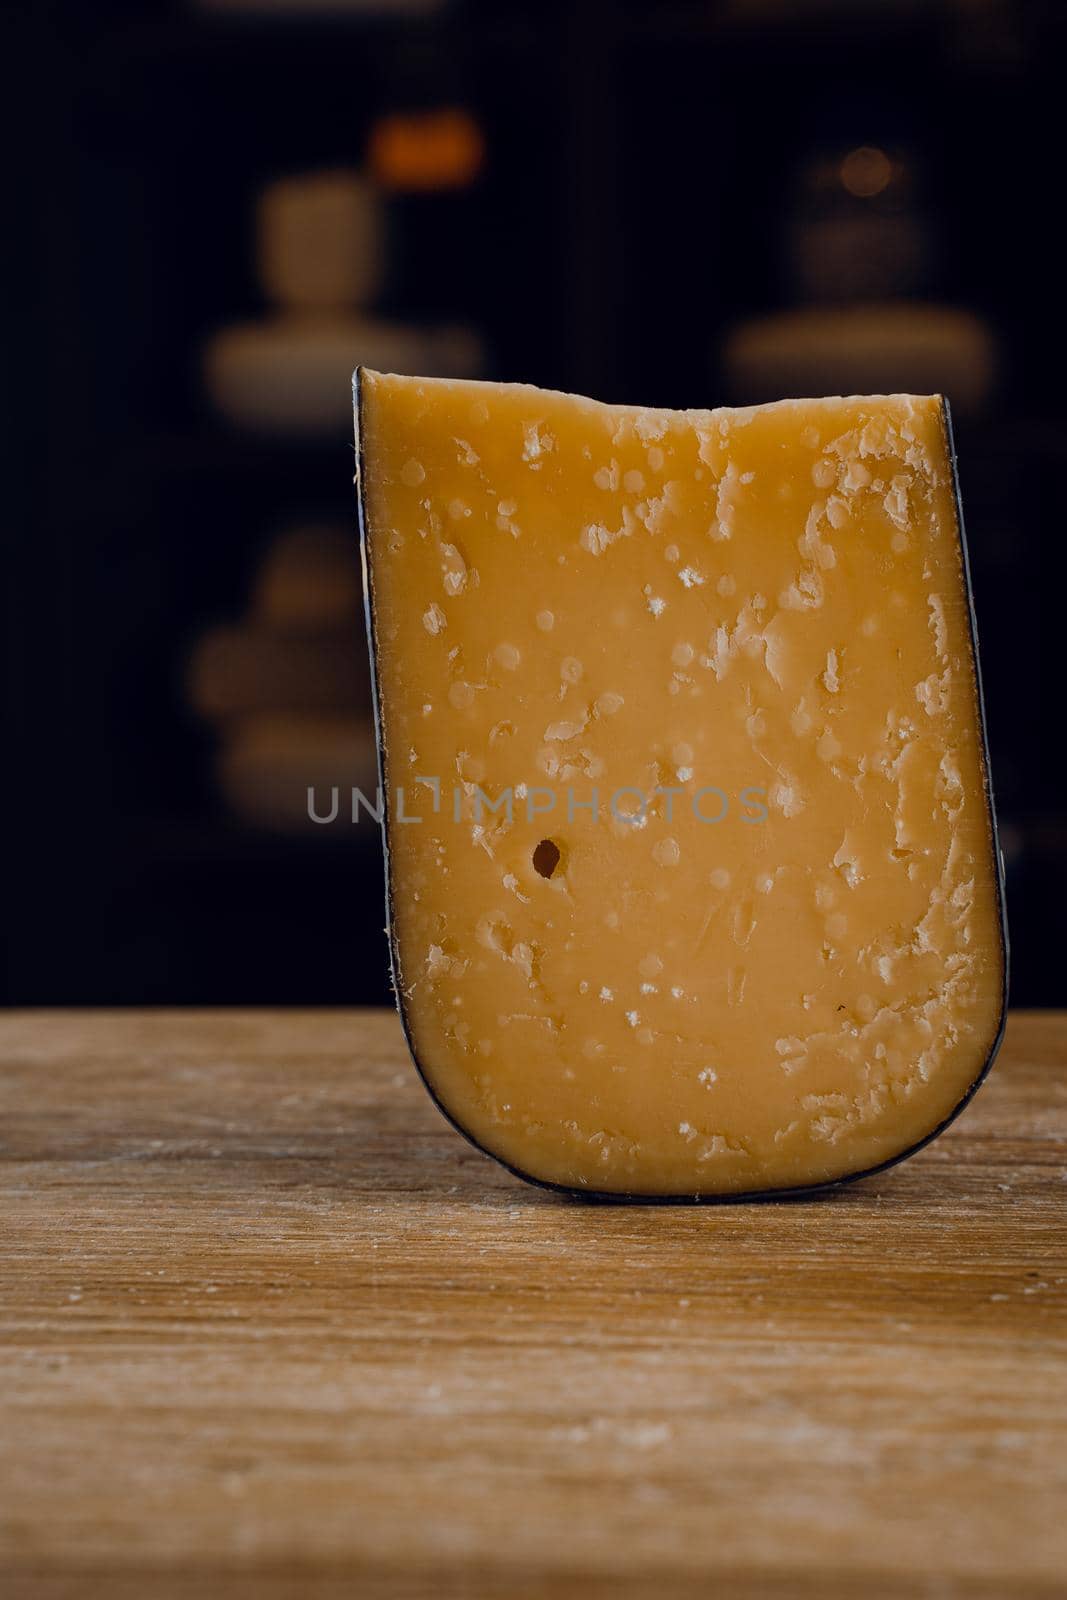 Parmesan hard aged cheese on wooden background. Snack tasty piece of cheese for appetizer